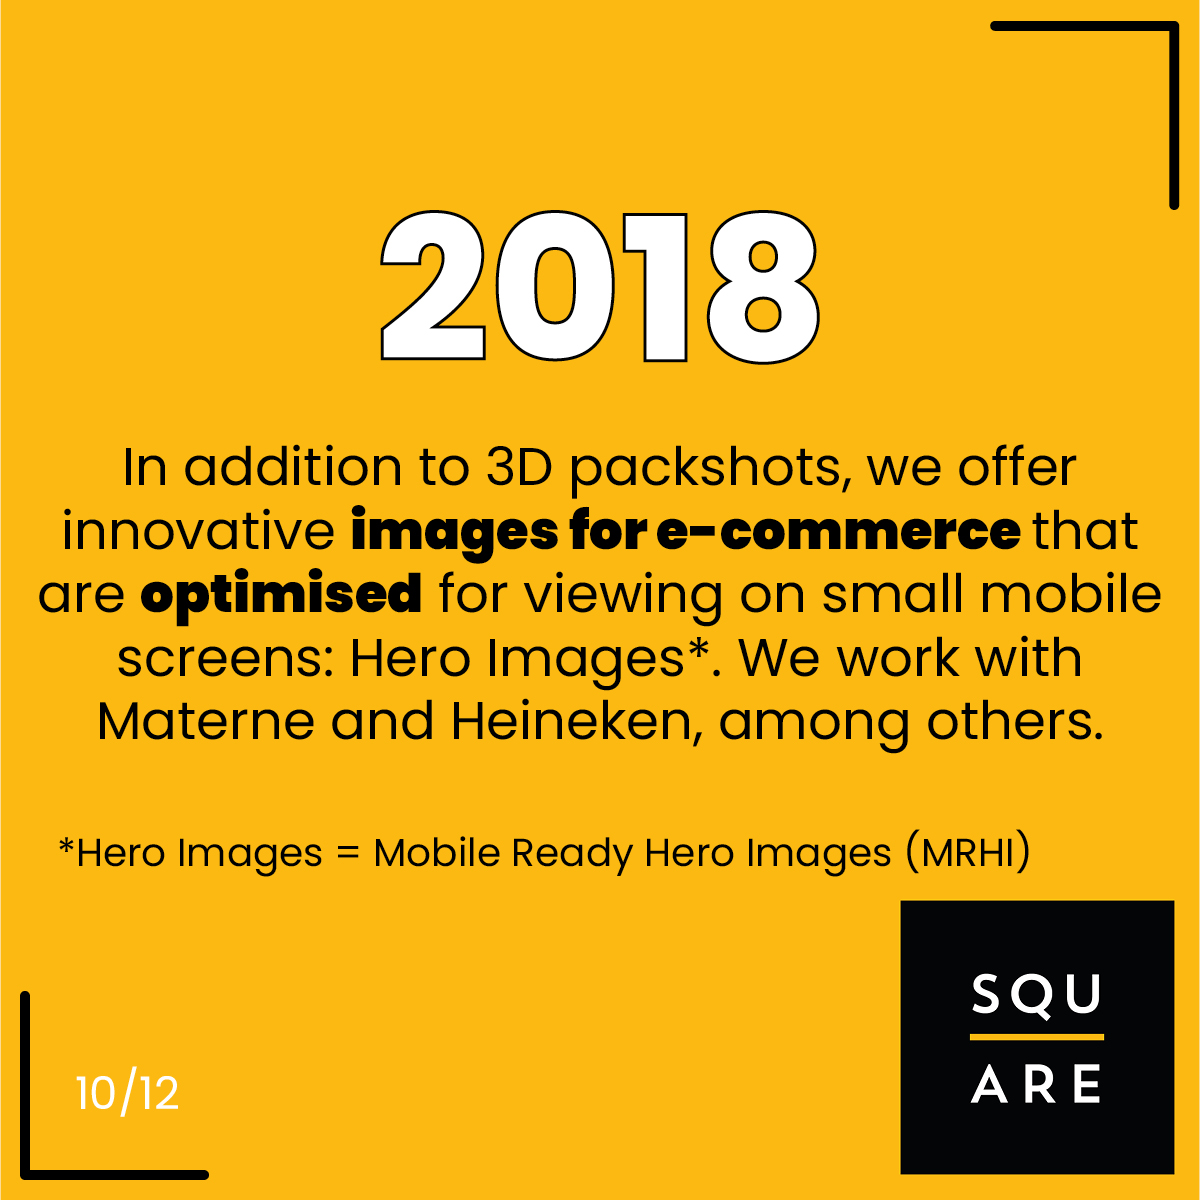 2018, In addition to 3D packshots, we offer innovative images for e-commerce that are optimised for viewing on small mobile screens: Hero Images (= Mobile Ready Hero Images (MRHI)). We work with Materne and Heineken, among others.